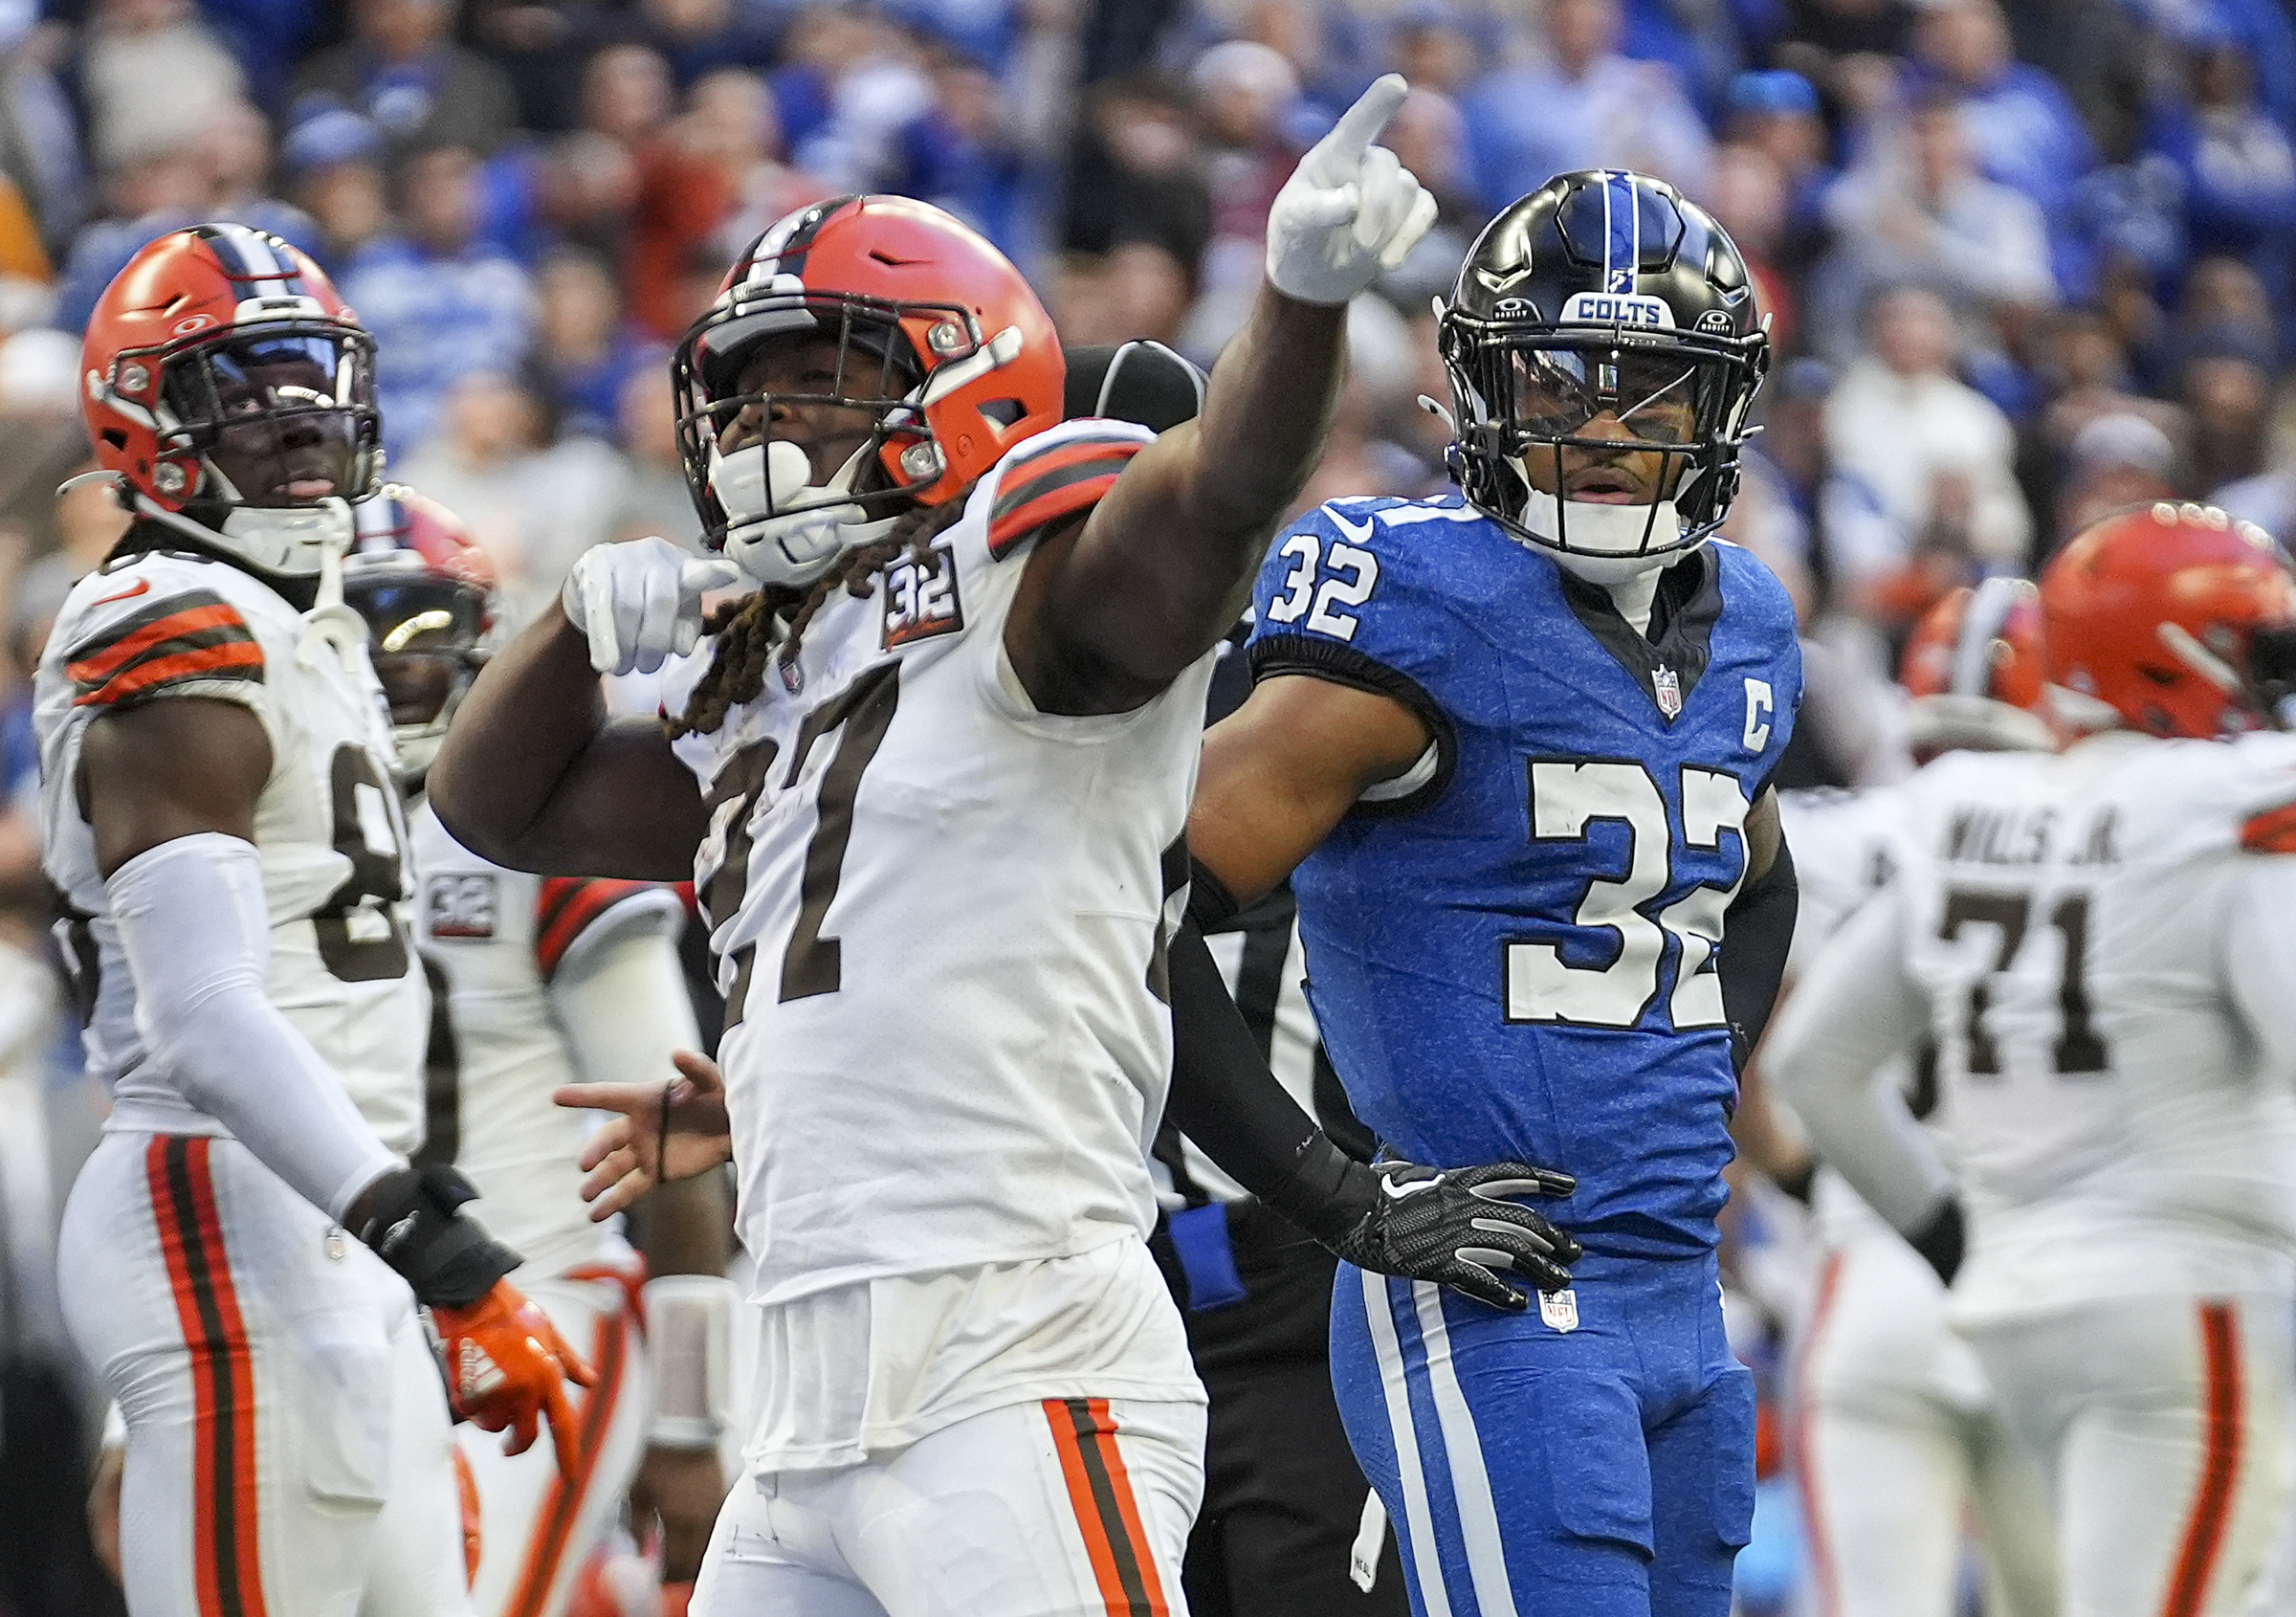 NFL: Cleveland Browns at Indianapolis Colts